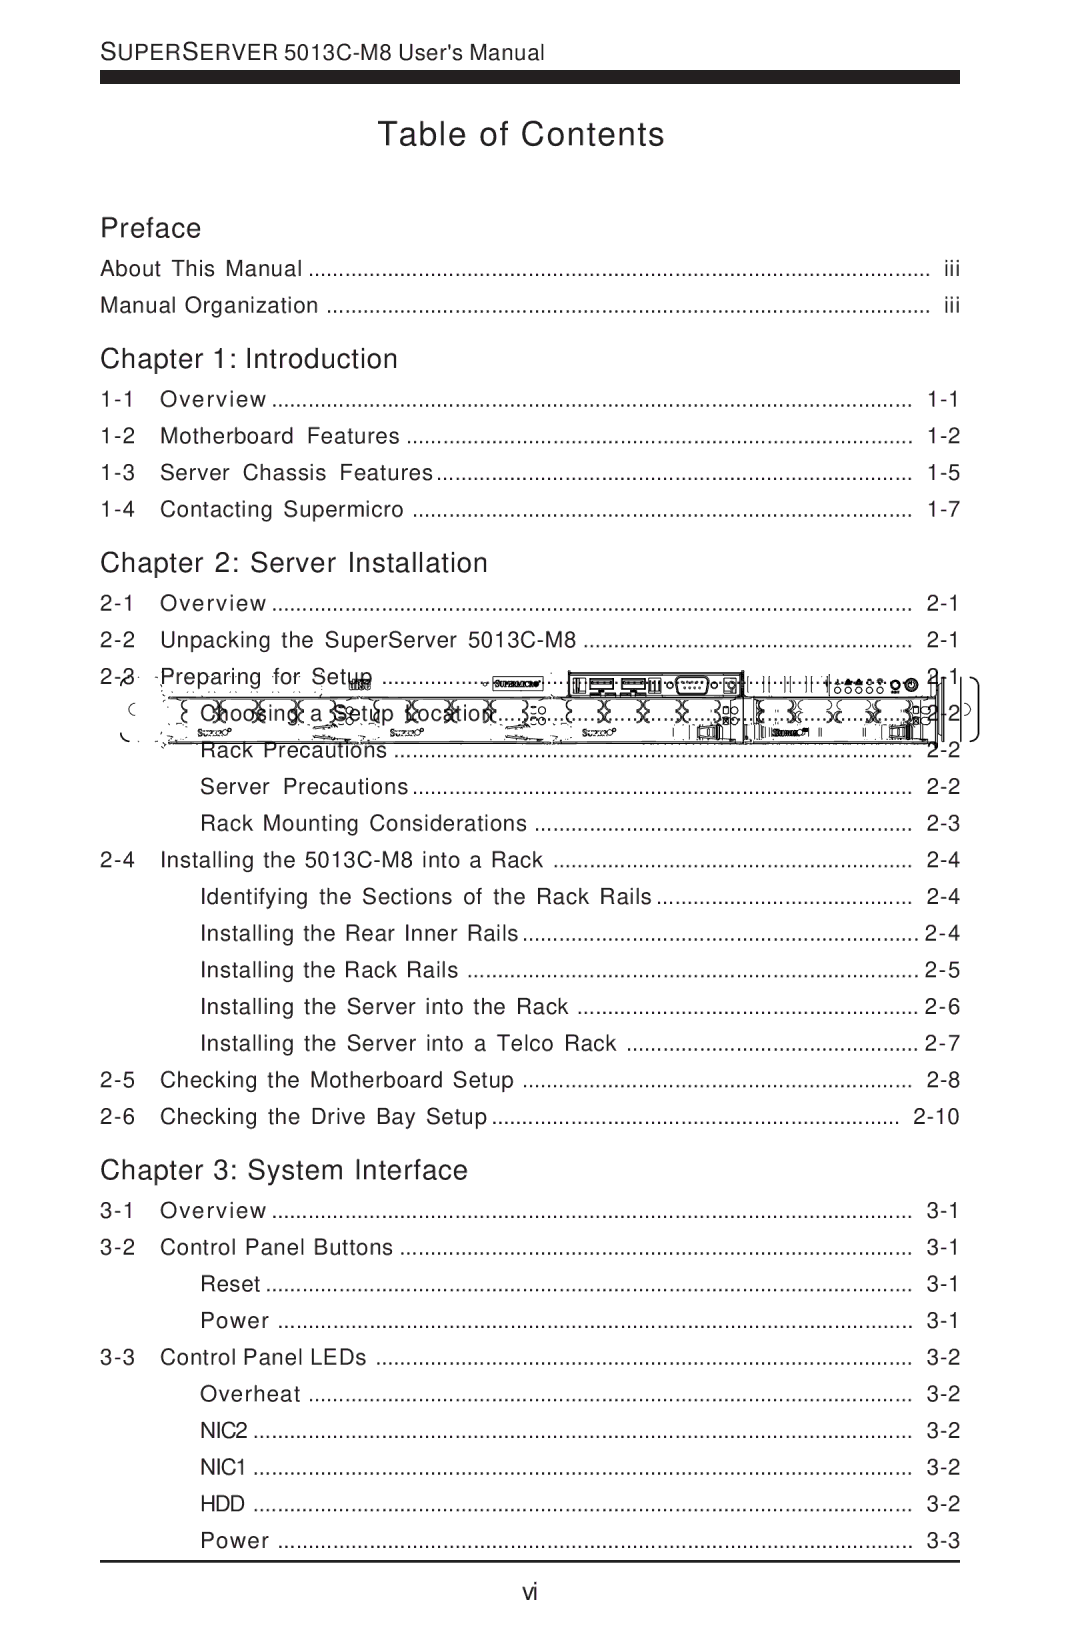 SUPER MICRO Computer 5013C-M8 user manual Table of Contents 